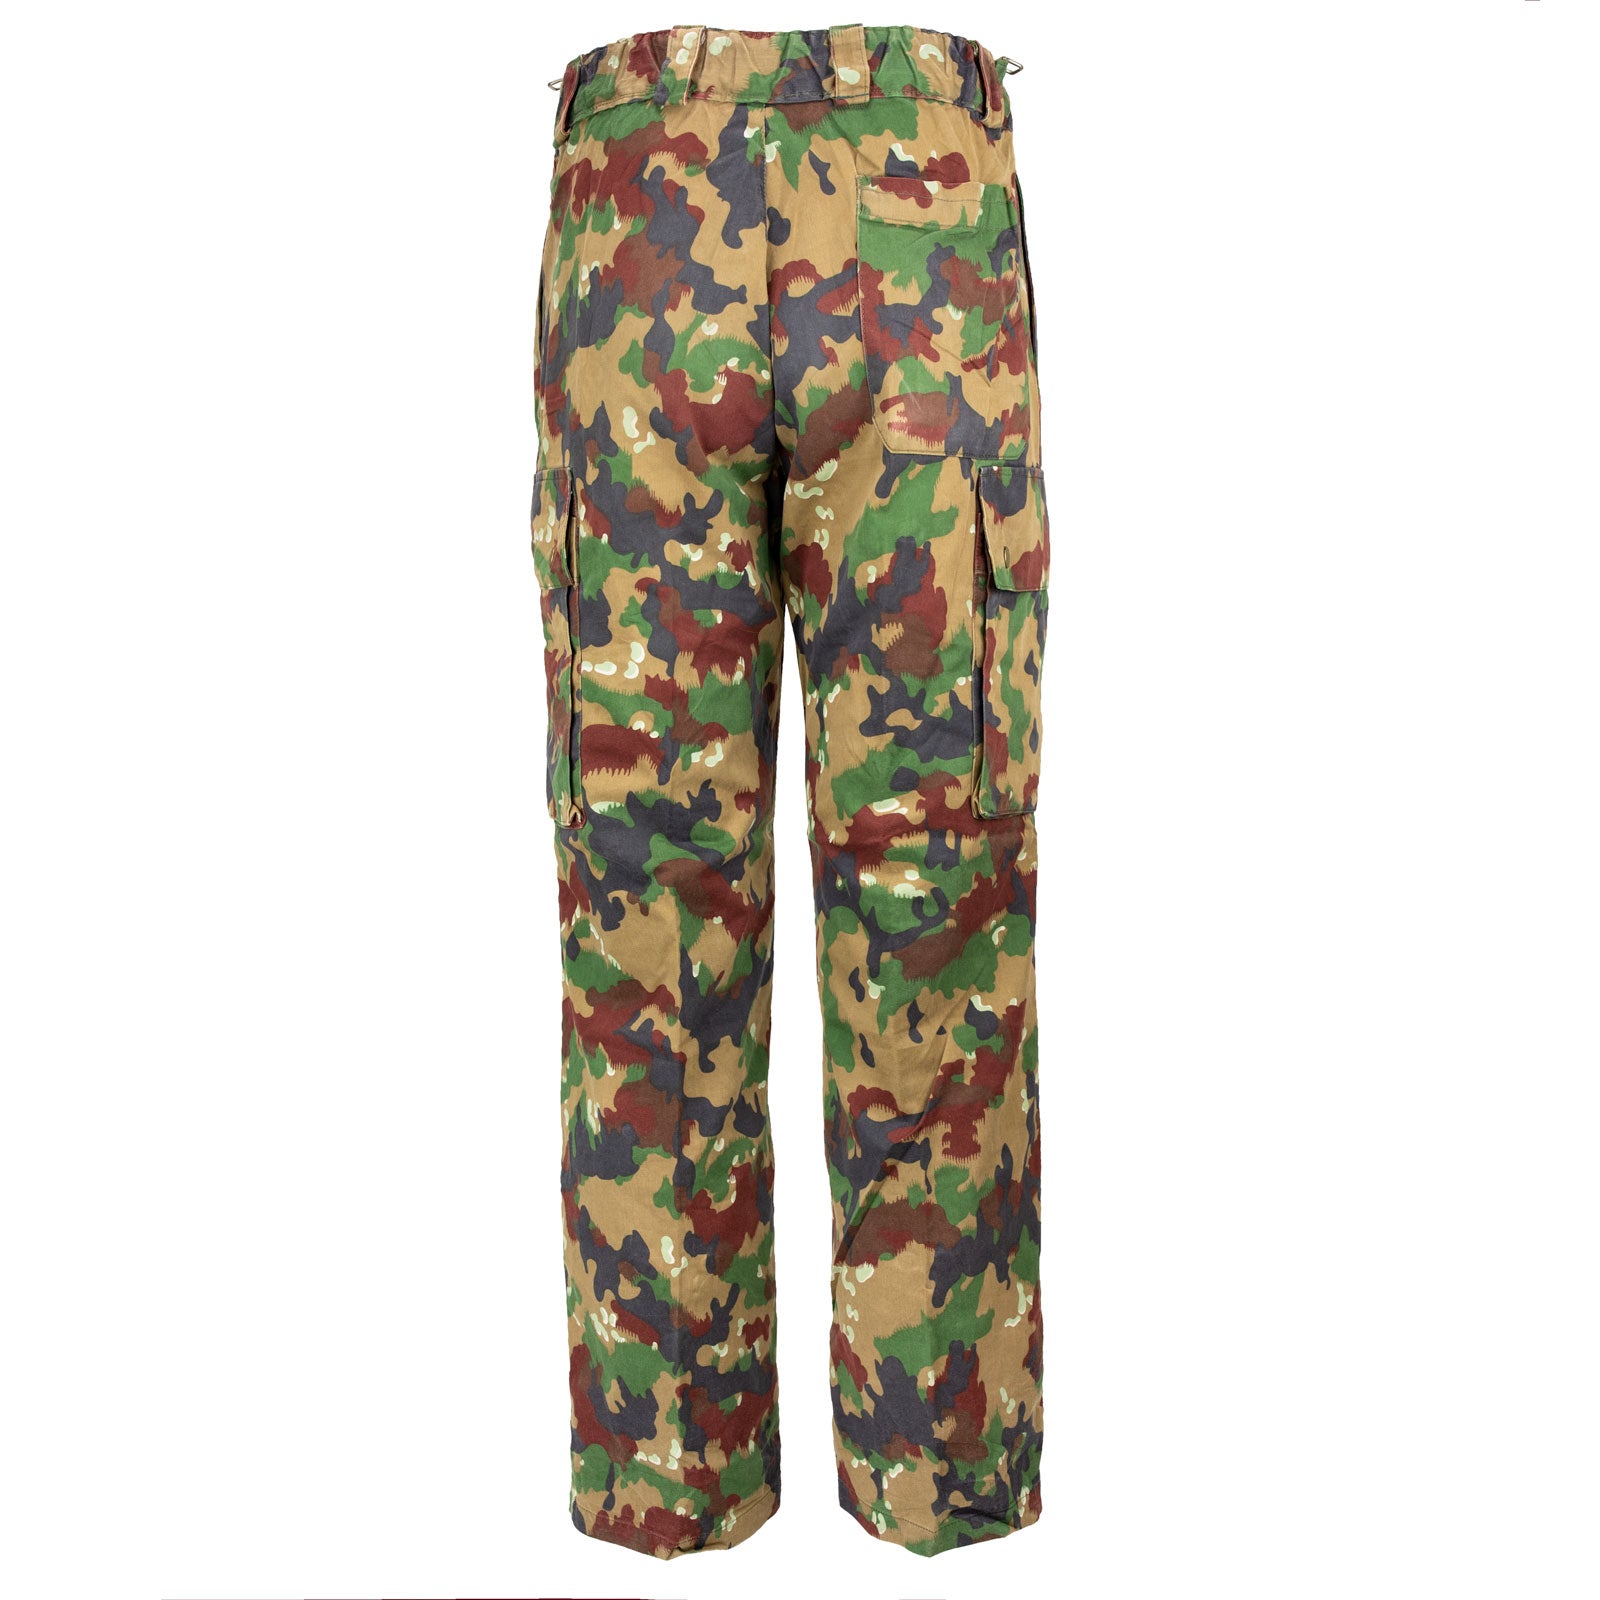 Swiss Army Lightweight Alpenflage Pants